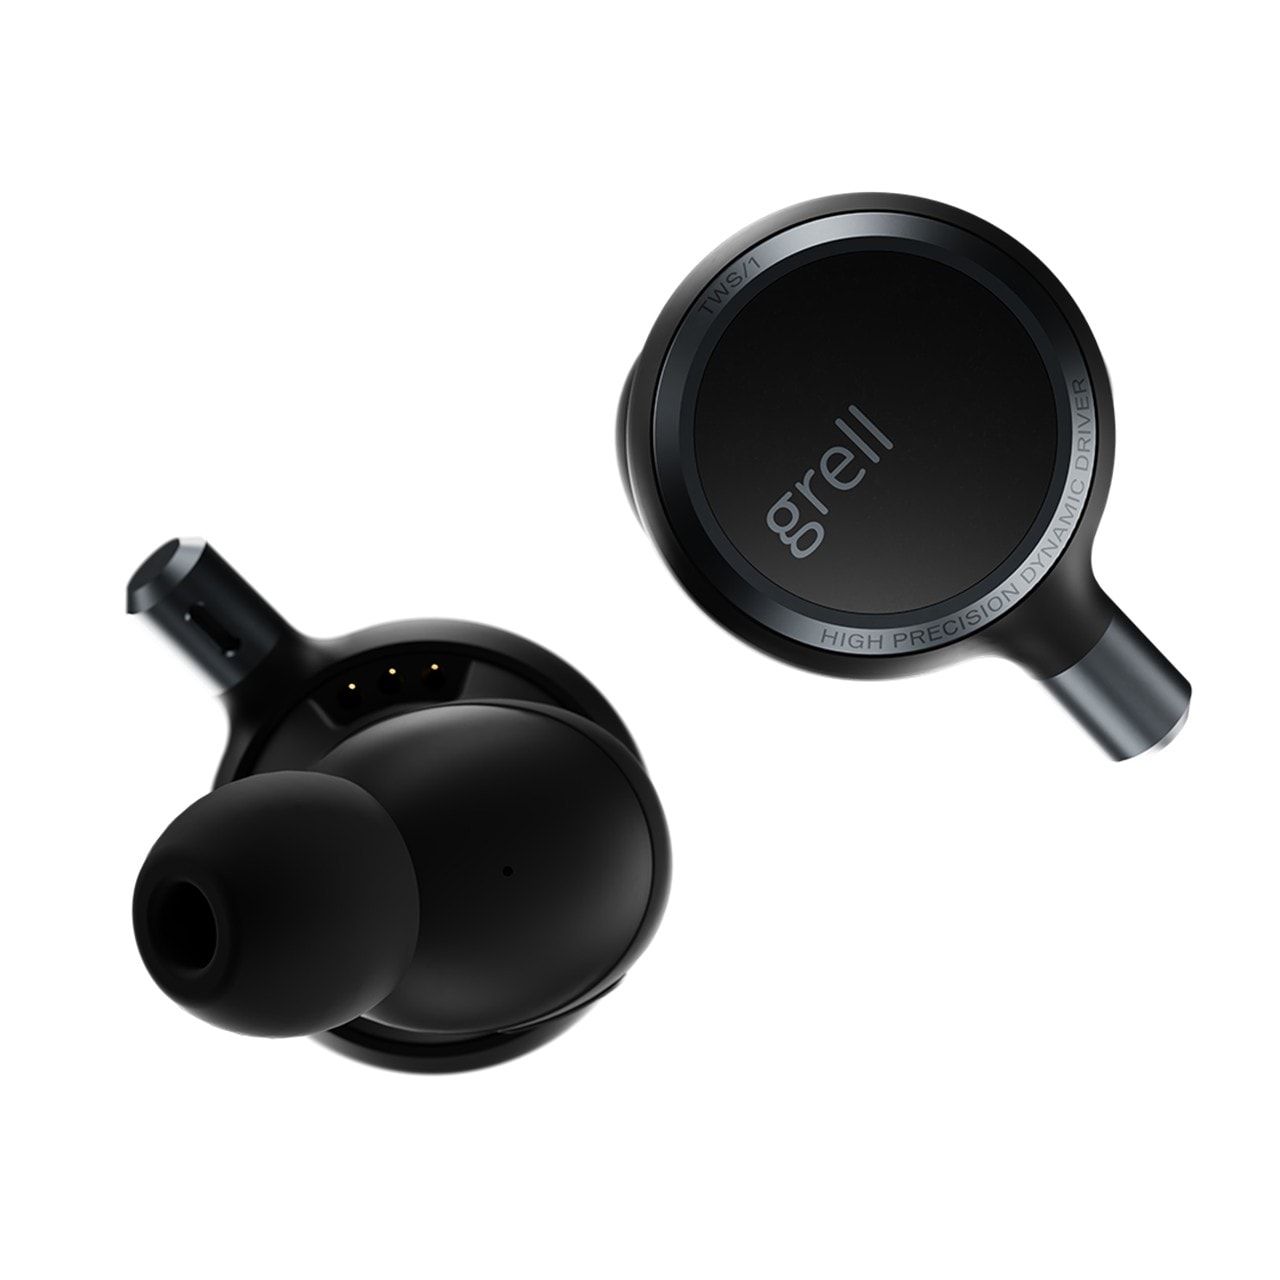 Grell TWS-1 earbuds feature an industrial design and high-quality sound.